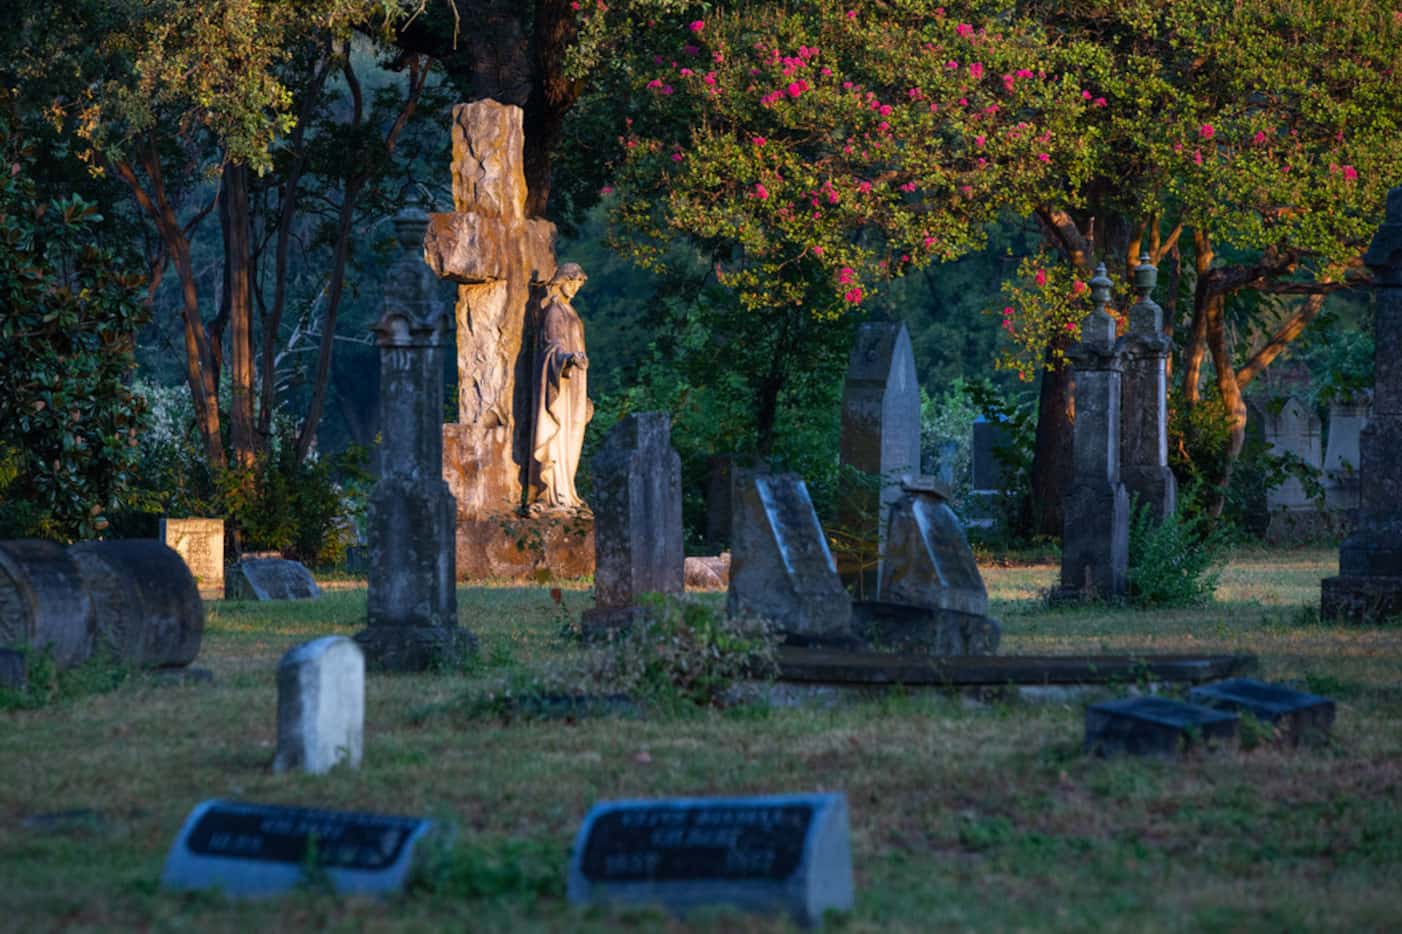 The rising sun shines on a headstone at the Oakland Cemetery in South Dallas on Thursday.